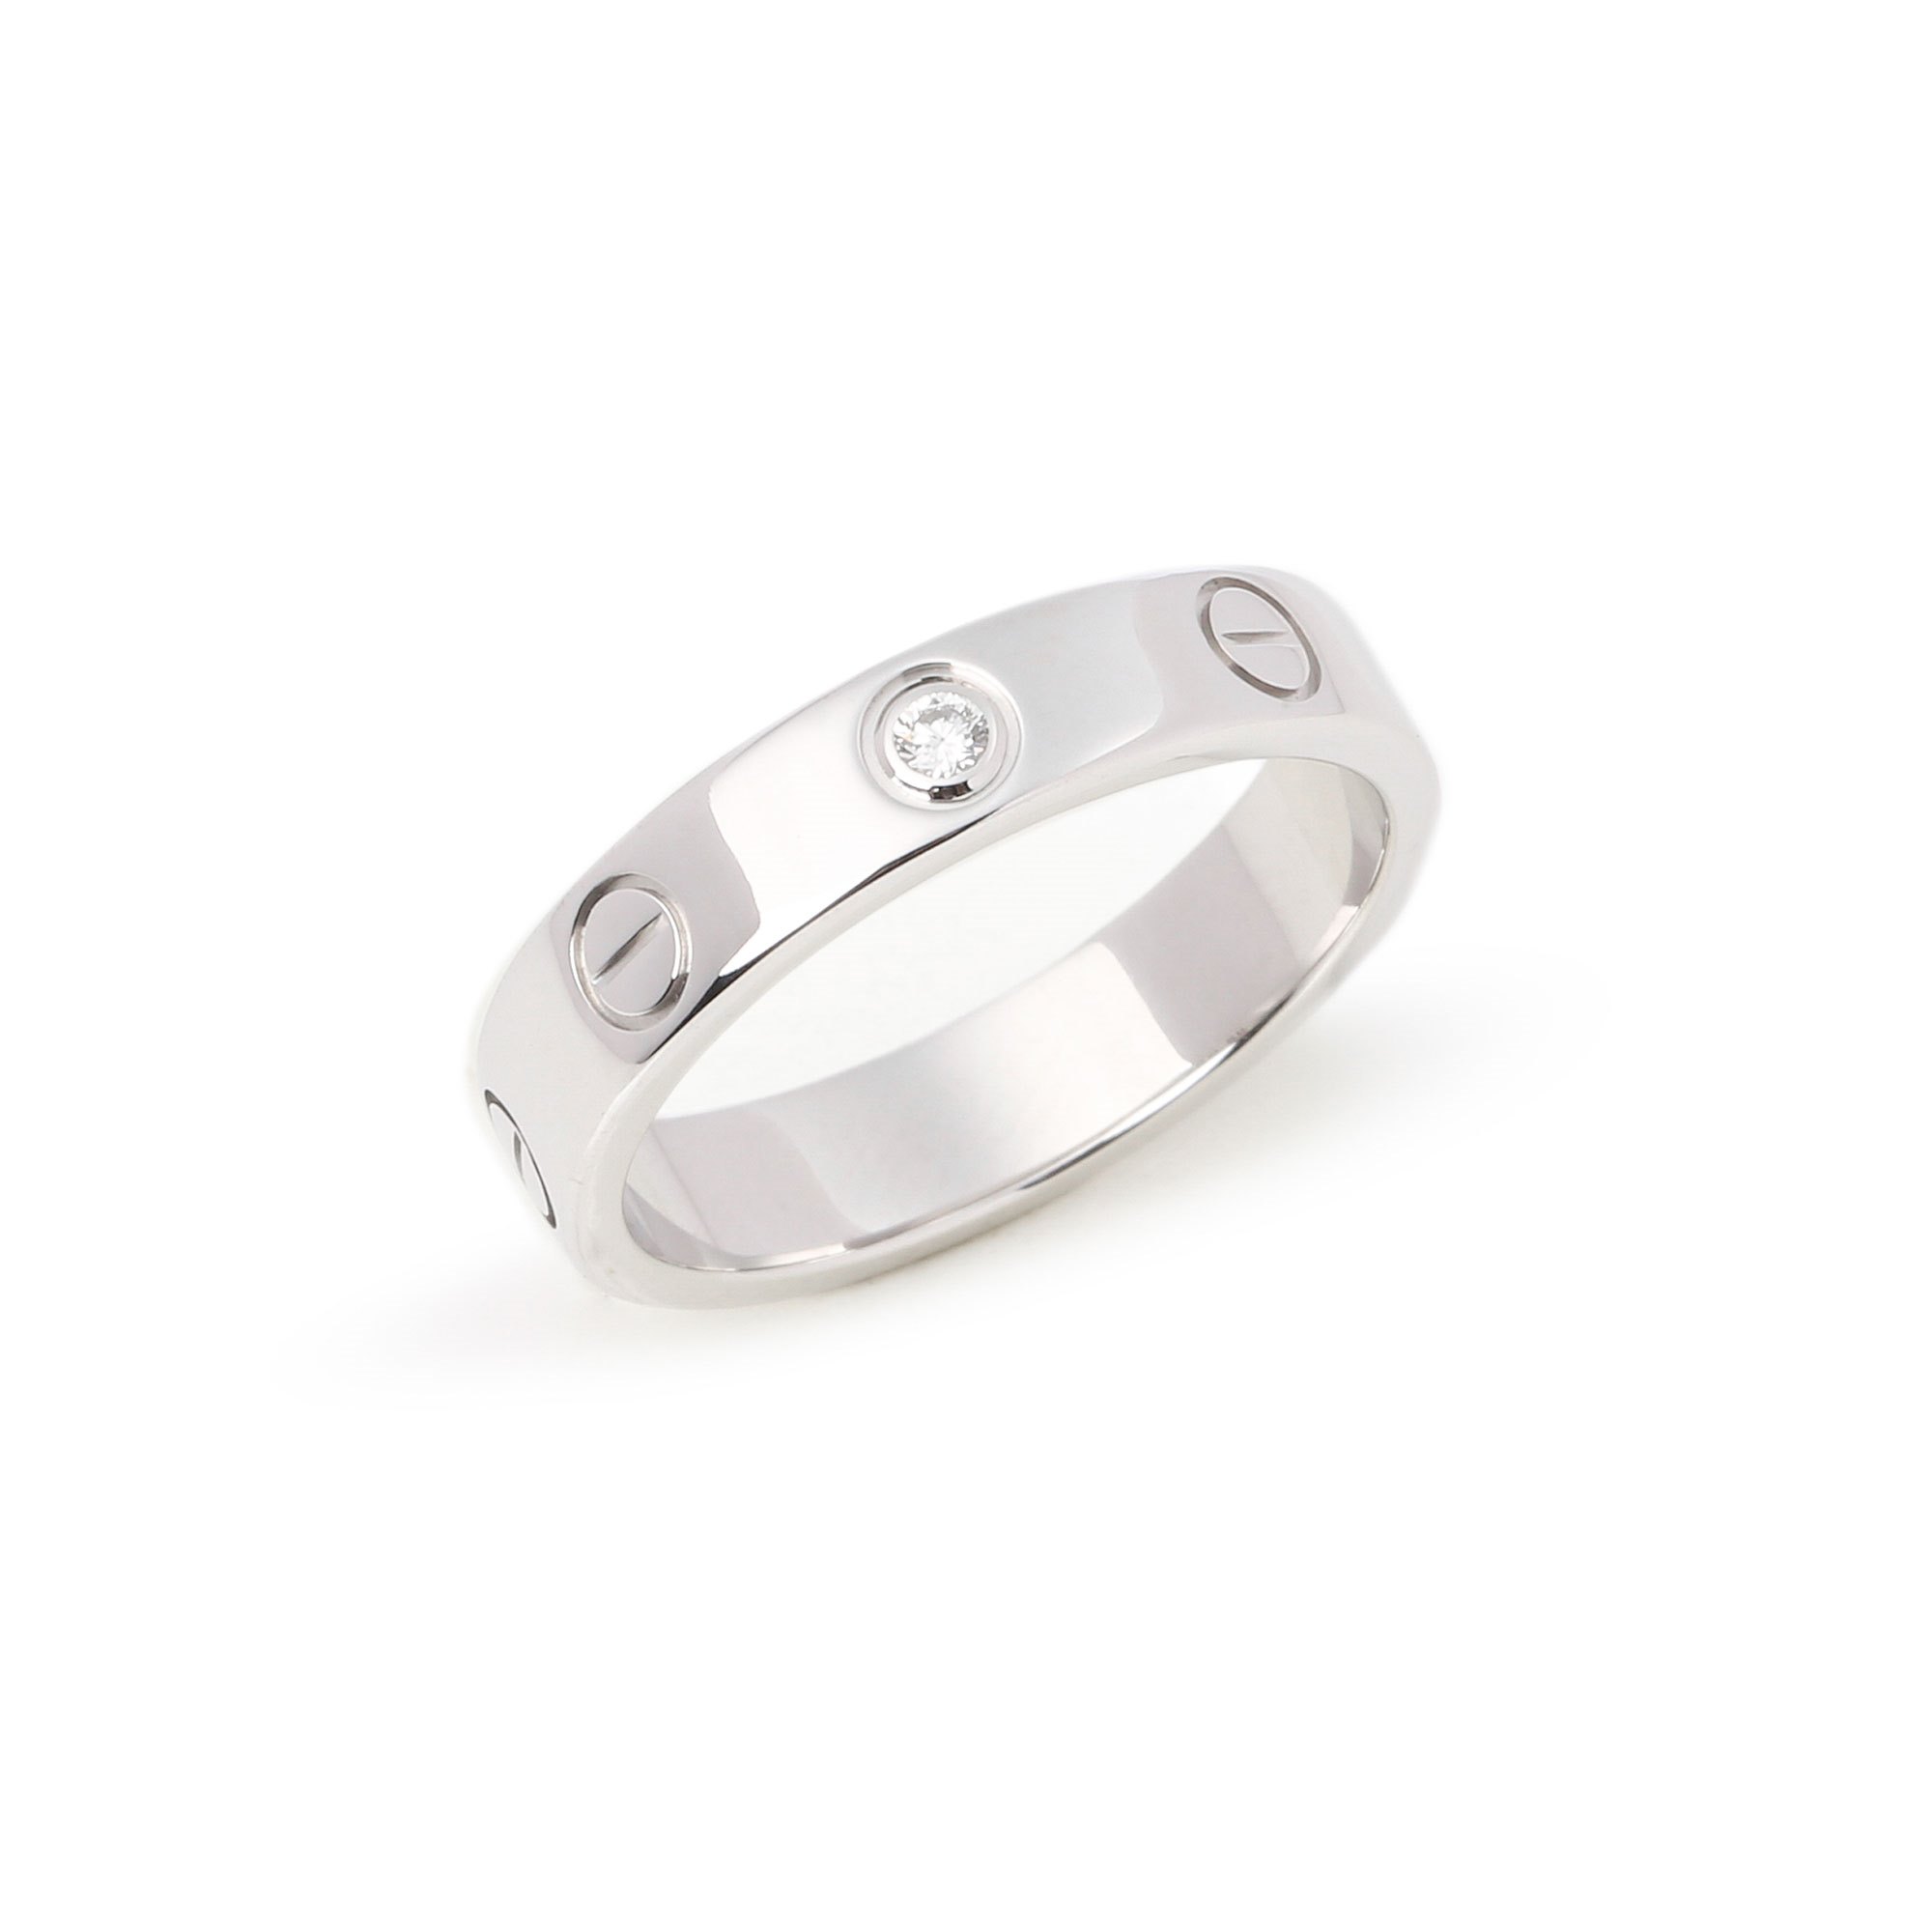 Cartier Love White Gold 1 Wedding Band Ring